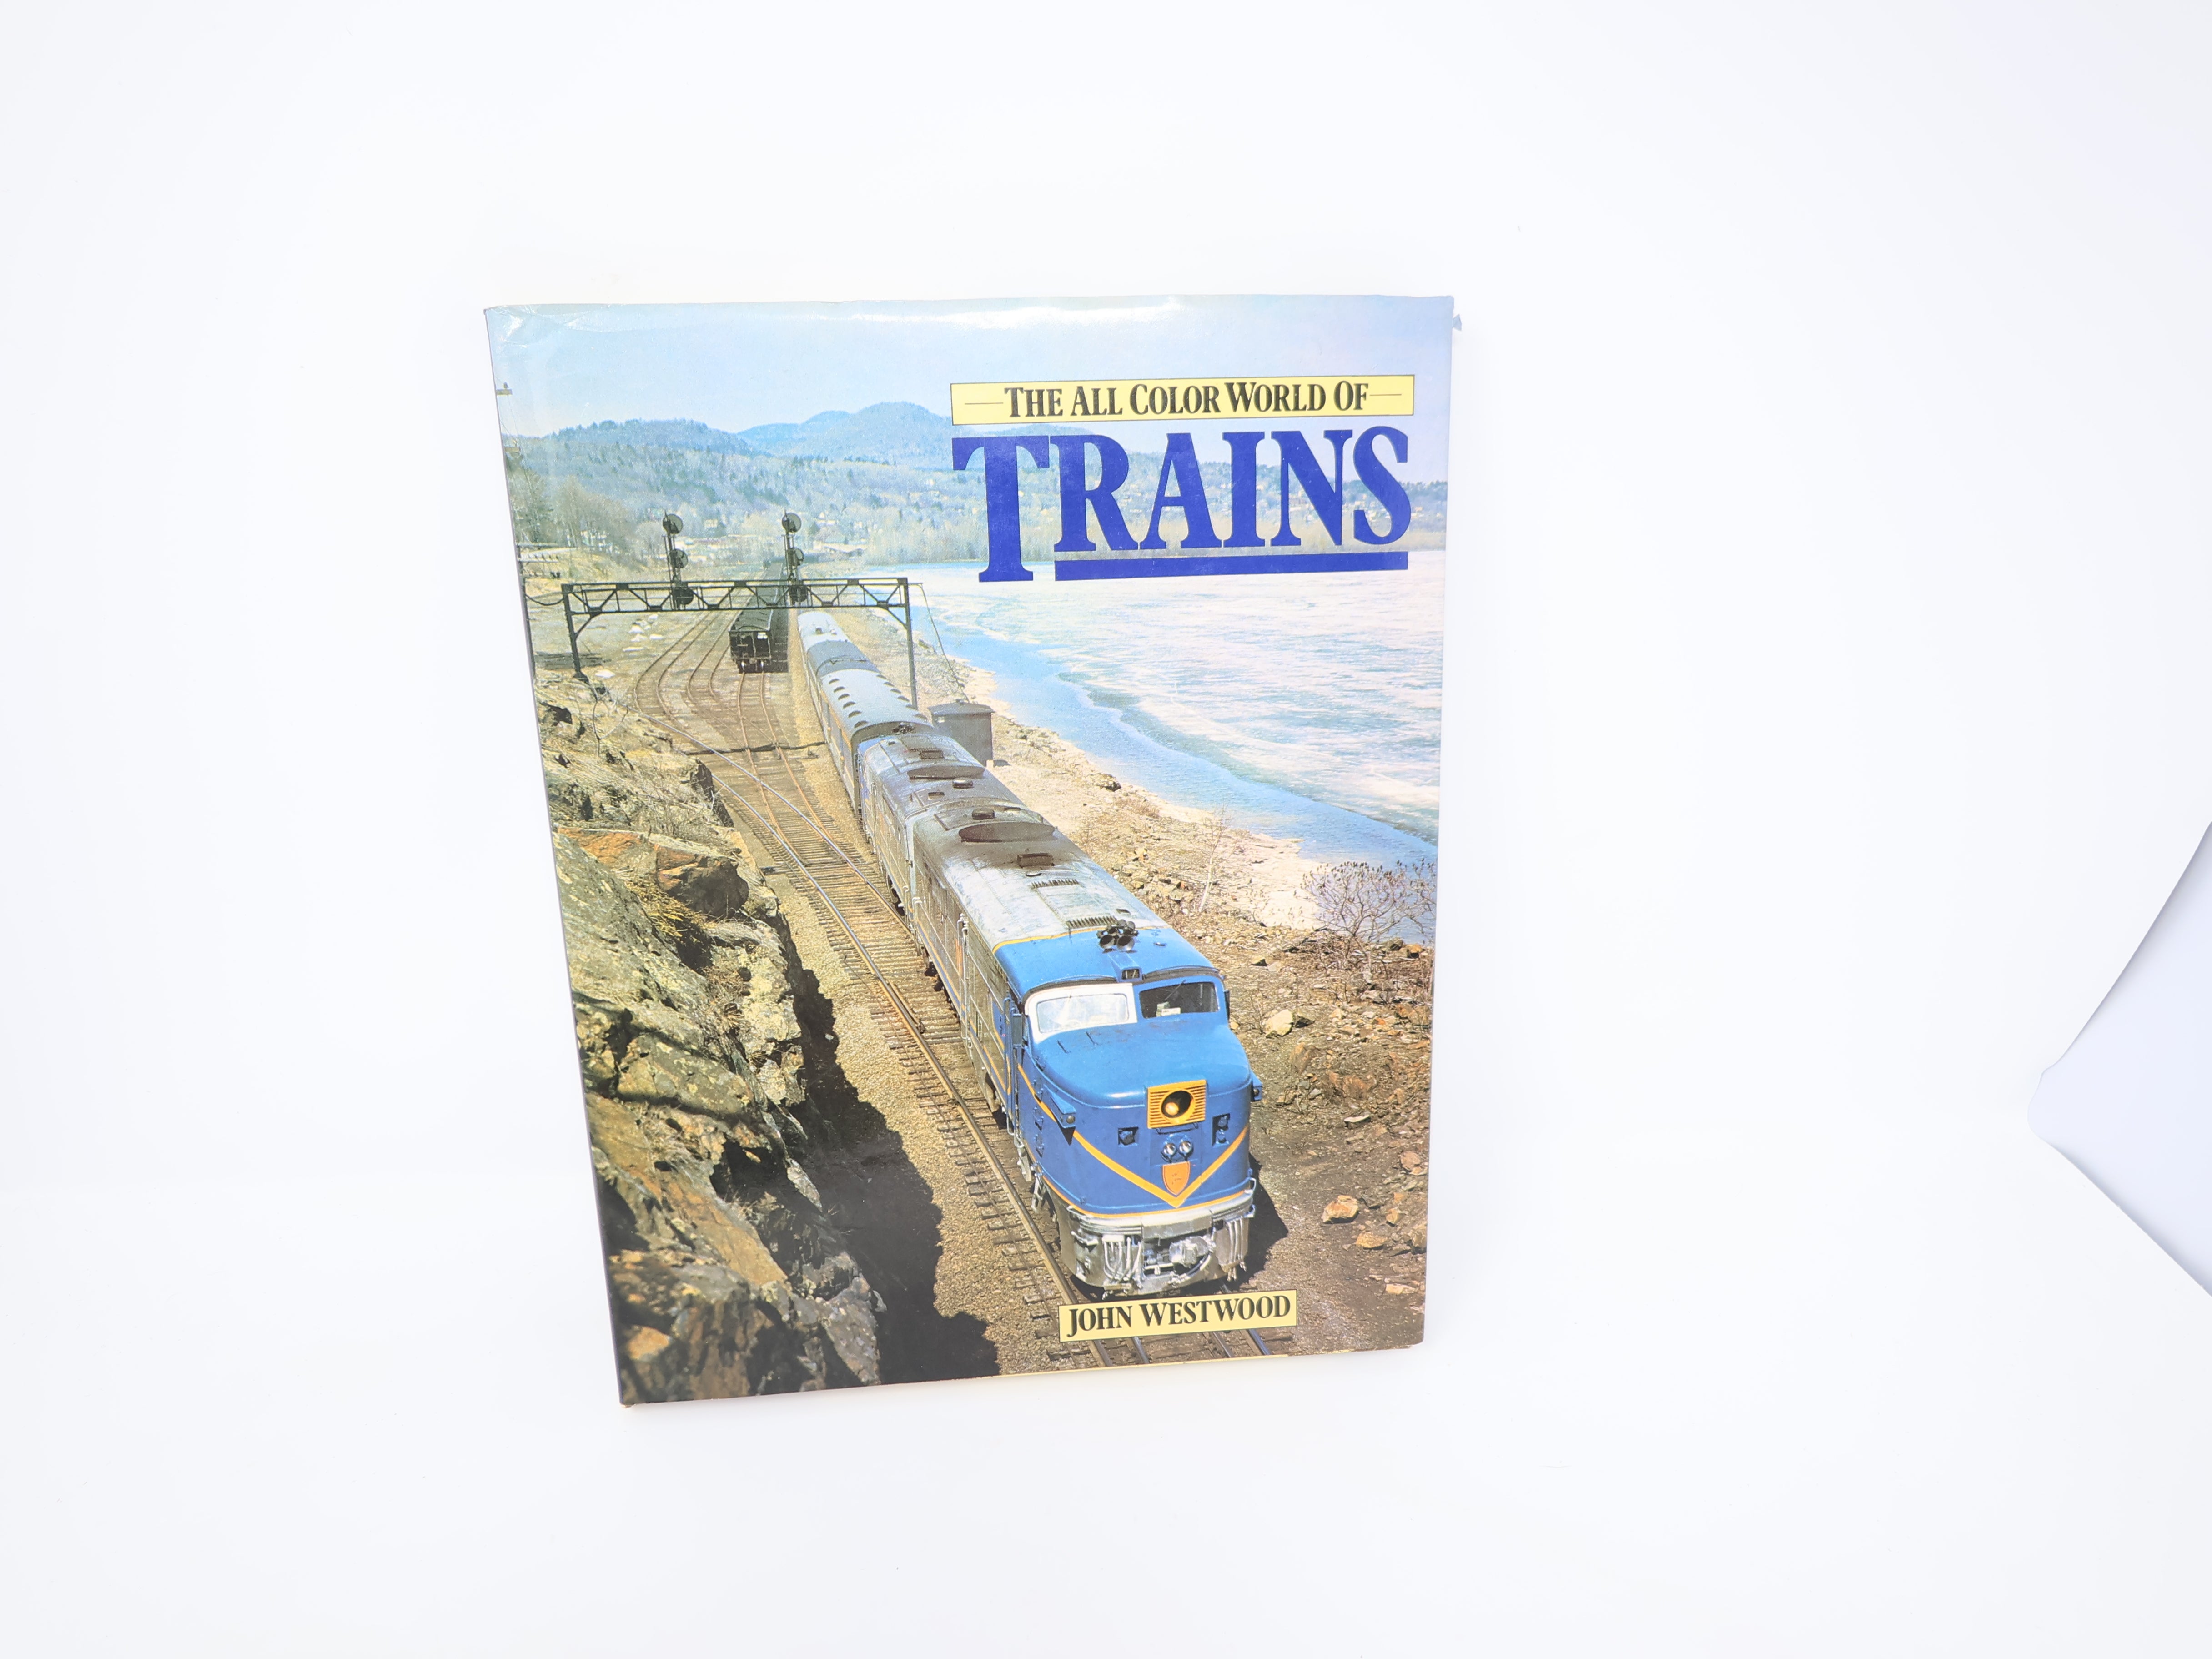 USED , The All Color World of Trains John Westwood Book